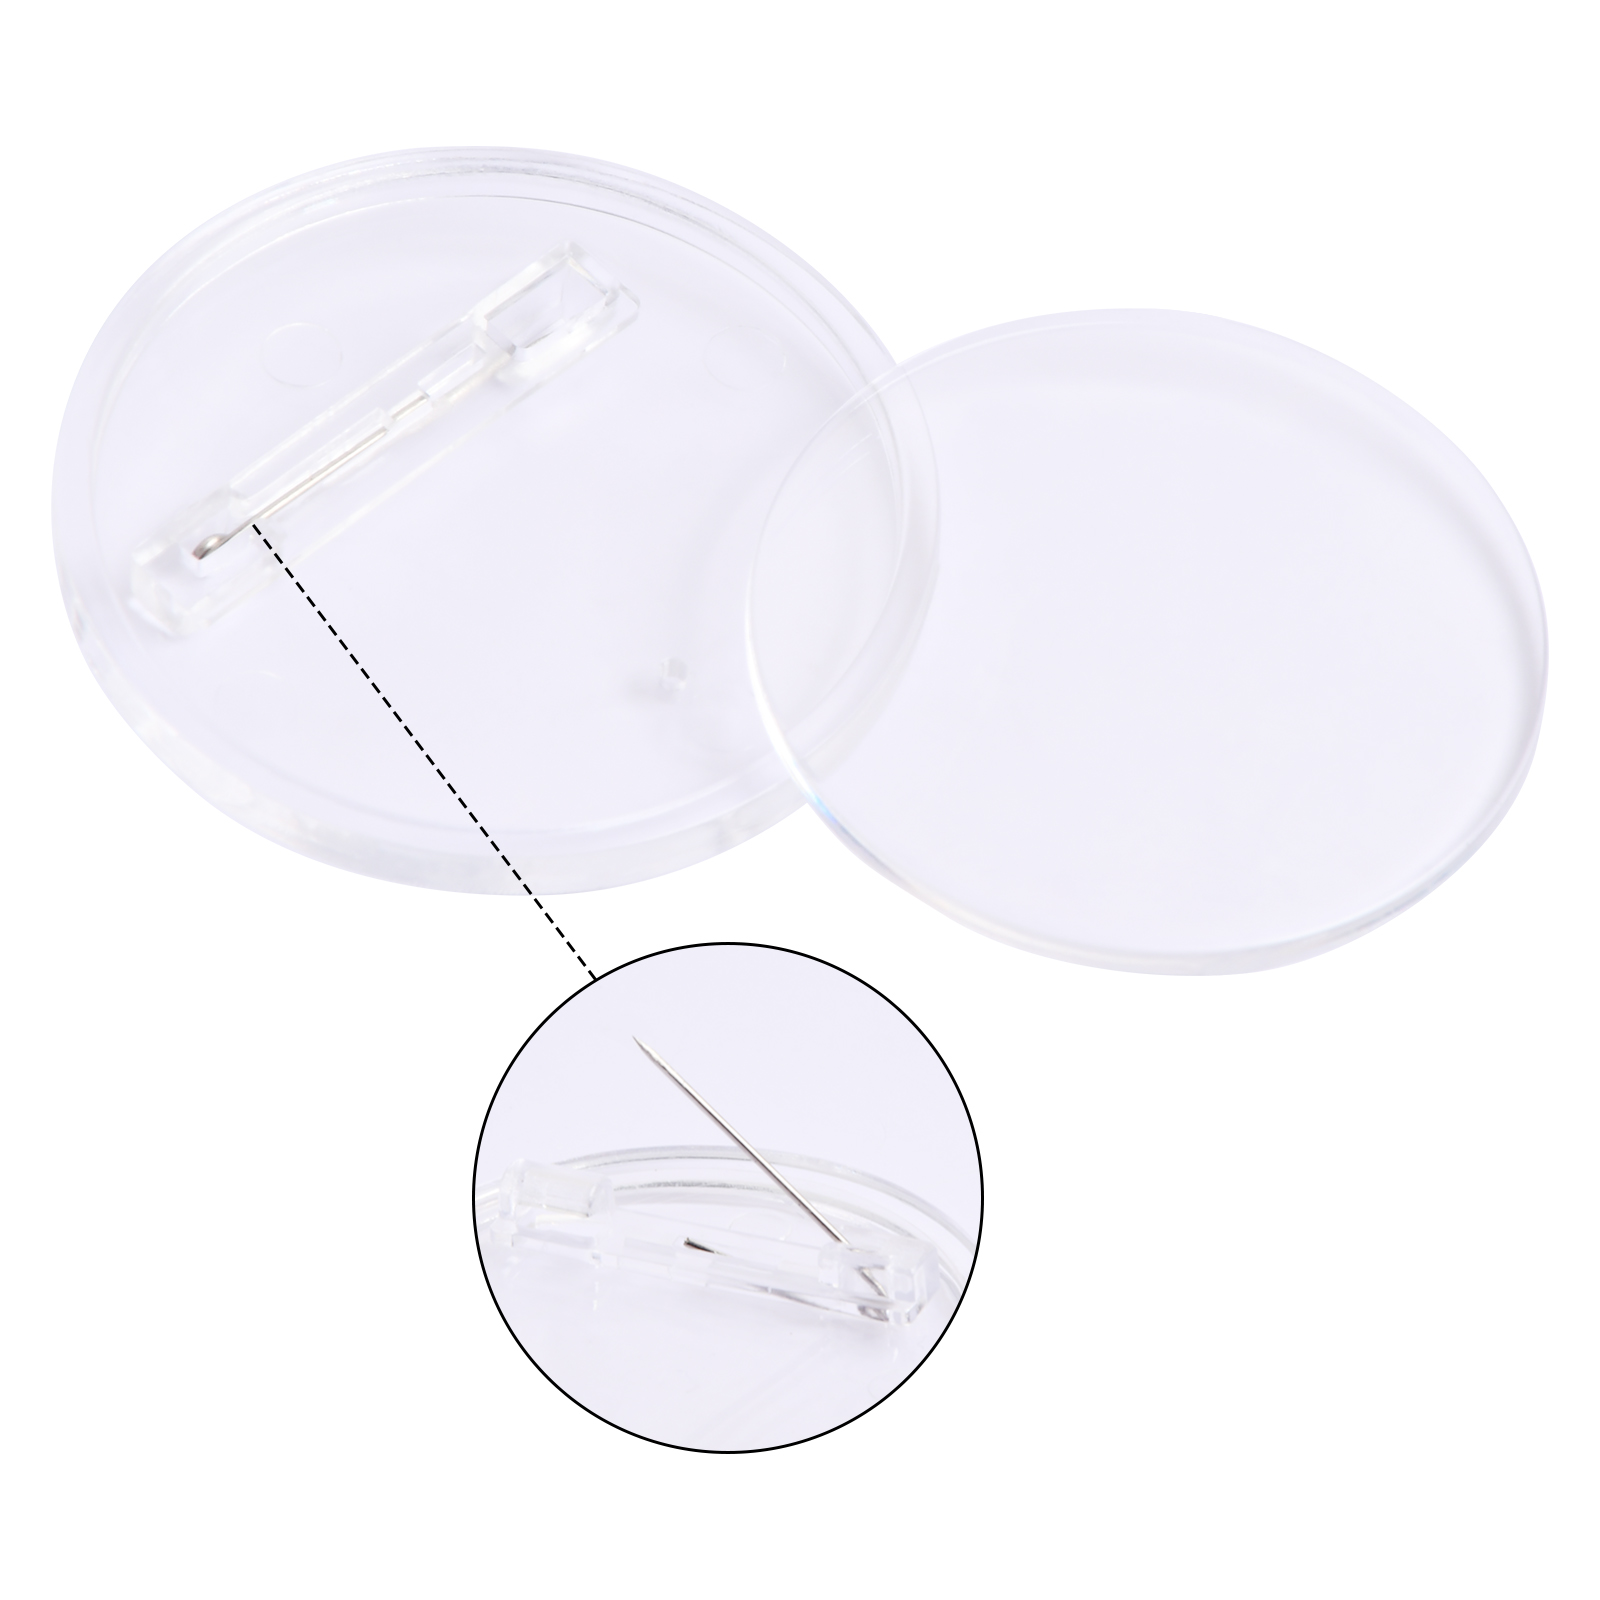  30Pcs Badge Making Kit for Kids, 1.45'' Clear Button Craft  Badges Make Your Own Badges Button Badge Acrylic Button Pin Badges for DIY  Craft Activities Decoration and Kids Party Bag Fillers (